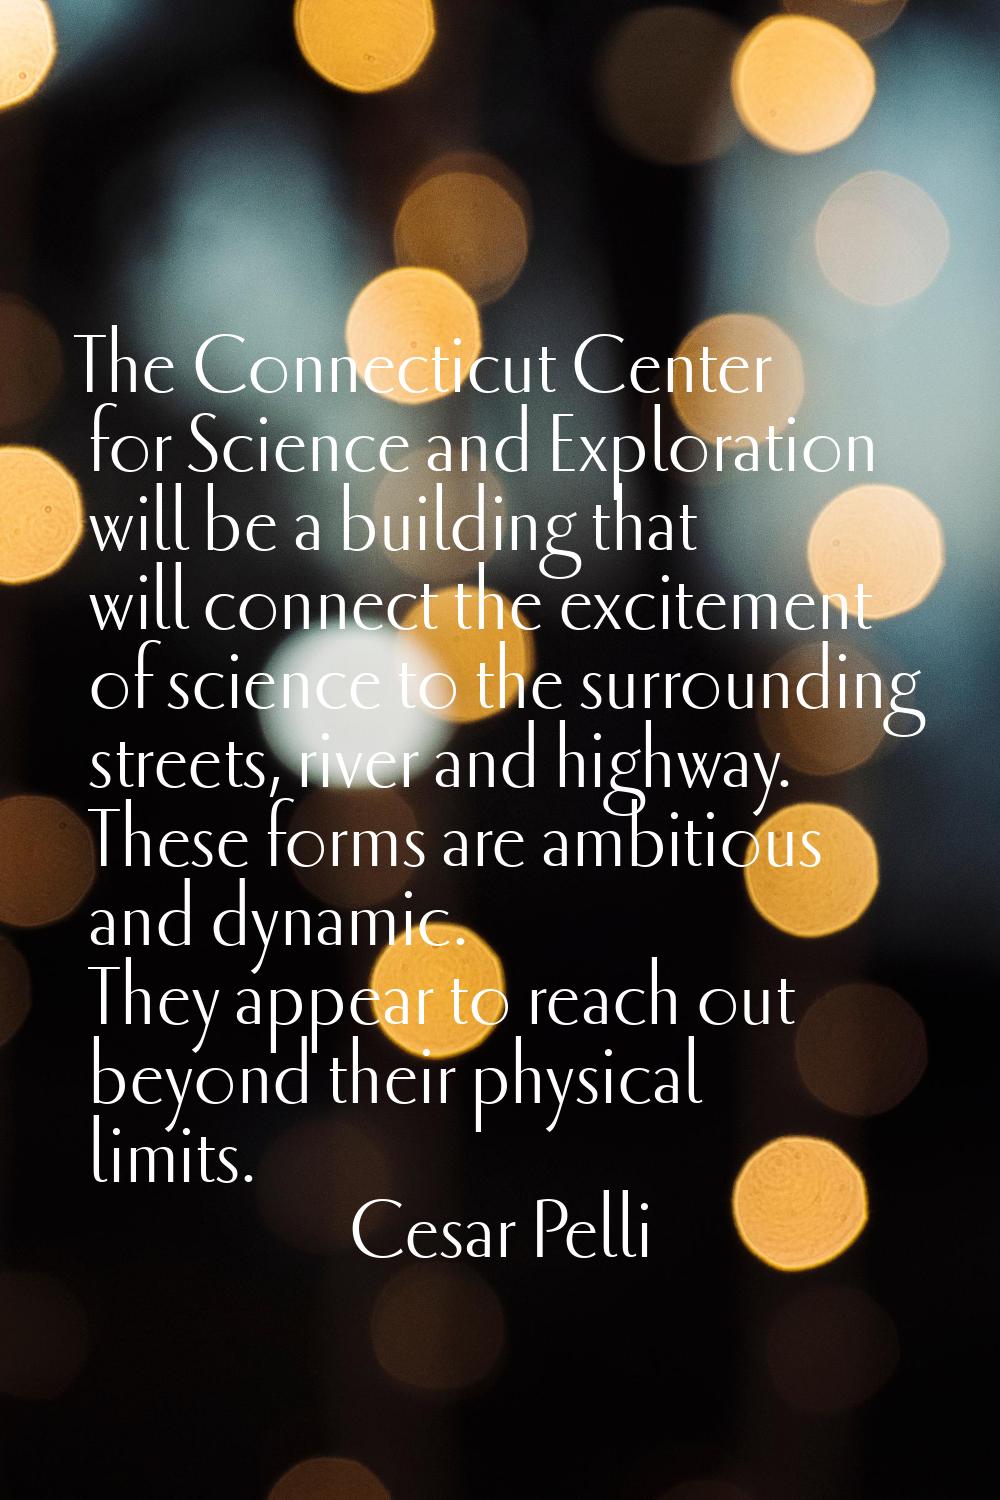 The Connecticut Center for Science and Exploration will be a building that will connect the excitem